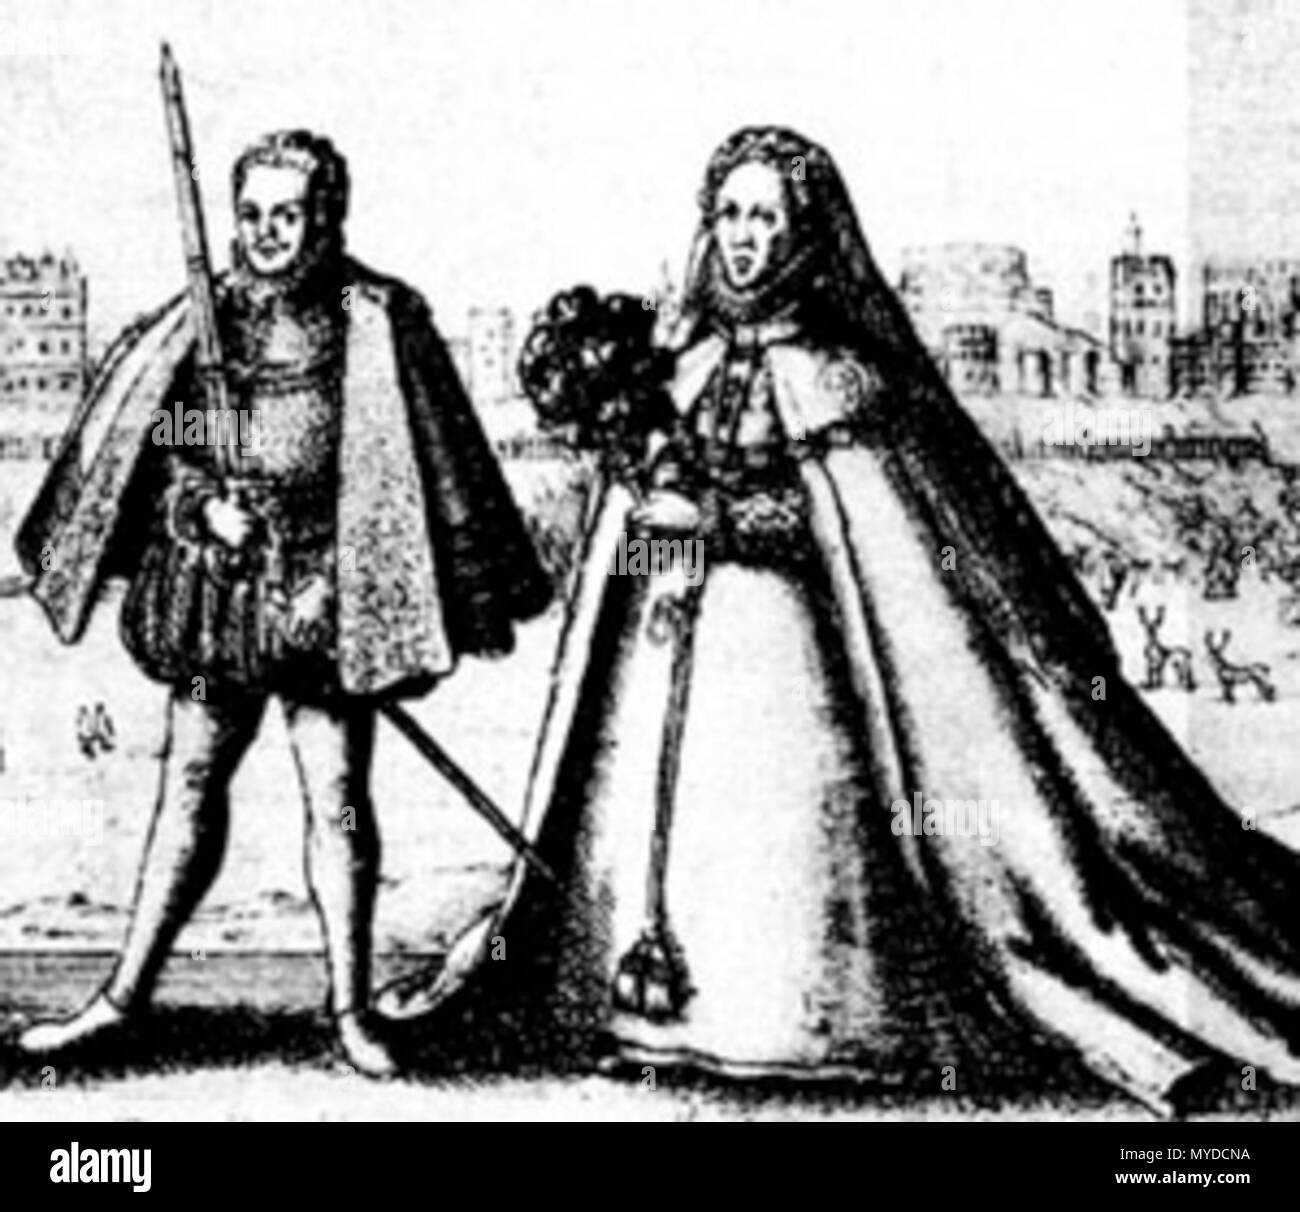 . English: Earl of Hertford (mistakenly identified as the 17th earl of Oxford on p. 190 of The de Veres of Castle Hedingham (1993) by Verily Anderson) and Queen Elizabeth I in the 1576 Procession of the Knights of the Garter. Detail of larger print. 26 May 2012. Wenceslaus (Wenzel) Hollar after Marcus Gheeraerts the Elder 151 Earl of Hertford and Queen Elizabeth I Stock Photo